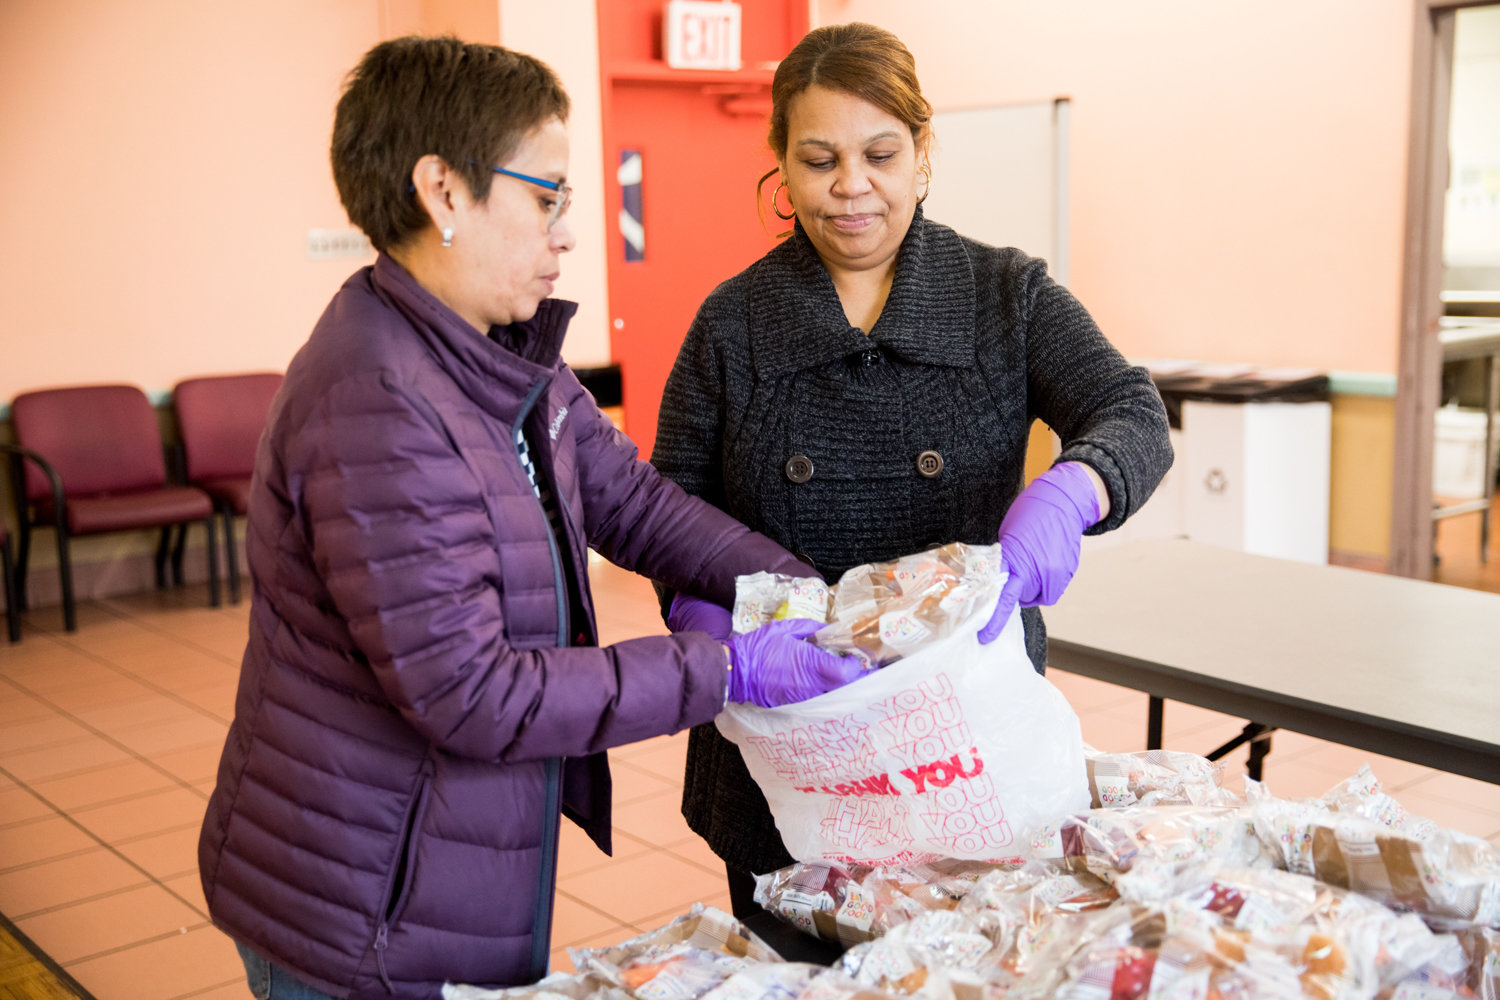 Norma Collado, left, and Carmen Morel pack food for a neighbor at the Kingsbridge Heights Community Center. The organization partnered with celebrity chef Jose Andres’ World Central Kitchen to serve as a food distribution center in the neighborhood. KHCC has moved quickly to adapt its services to meet the needs of the community during the coronavirus pandemic.